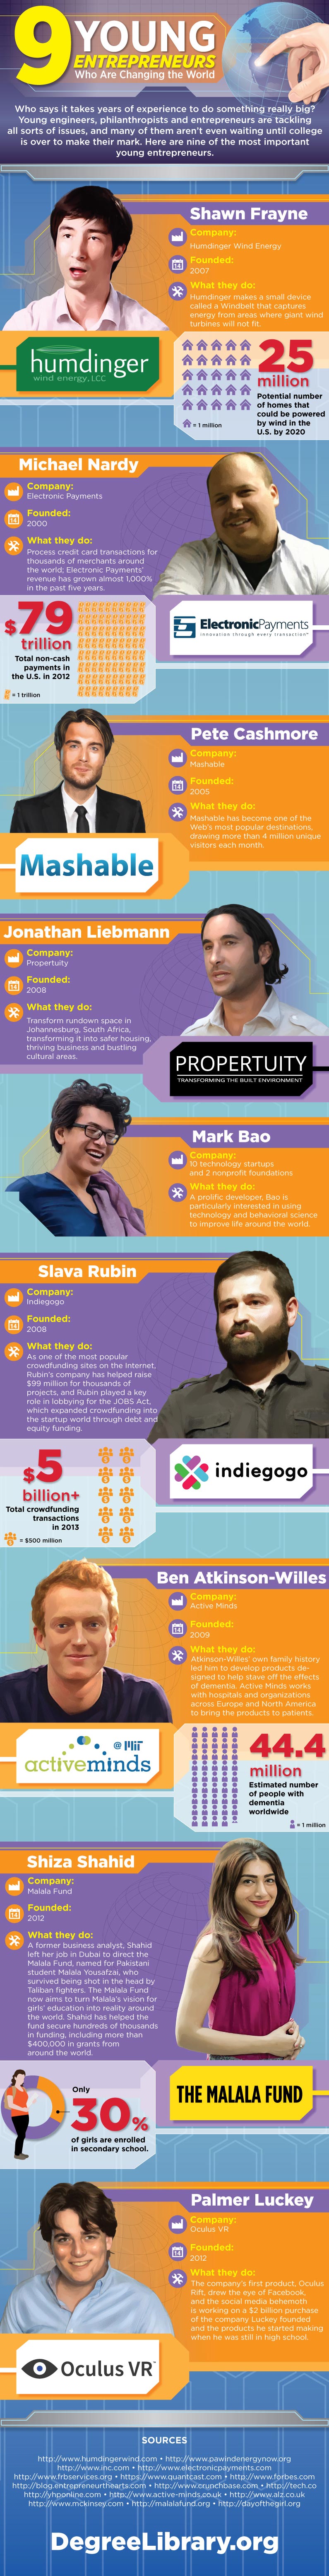 Young entrepreneurs who changes the world - infographic